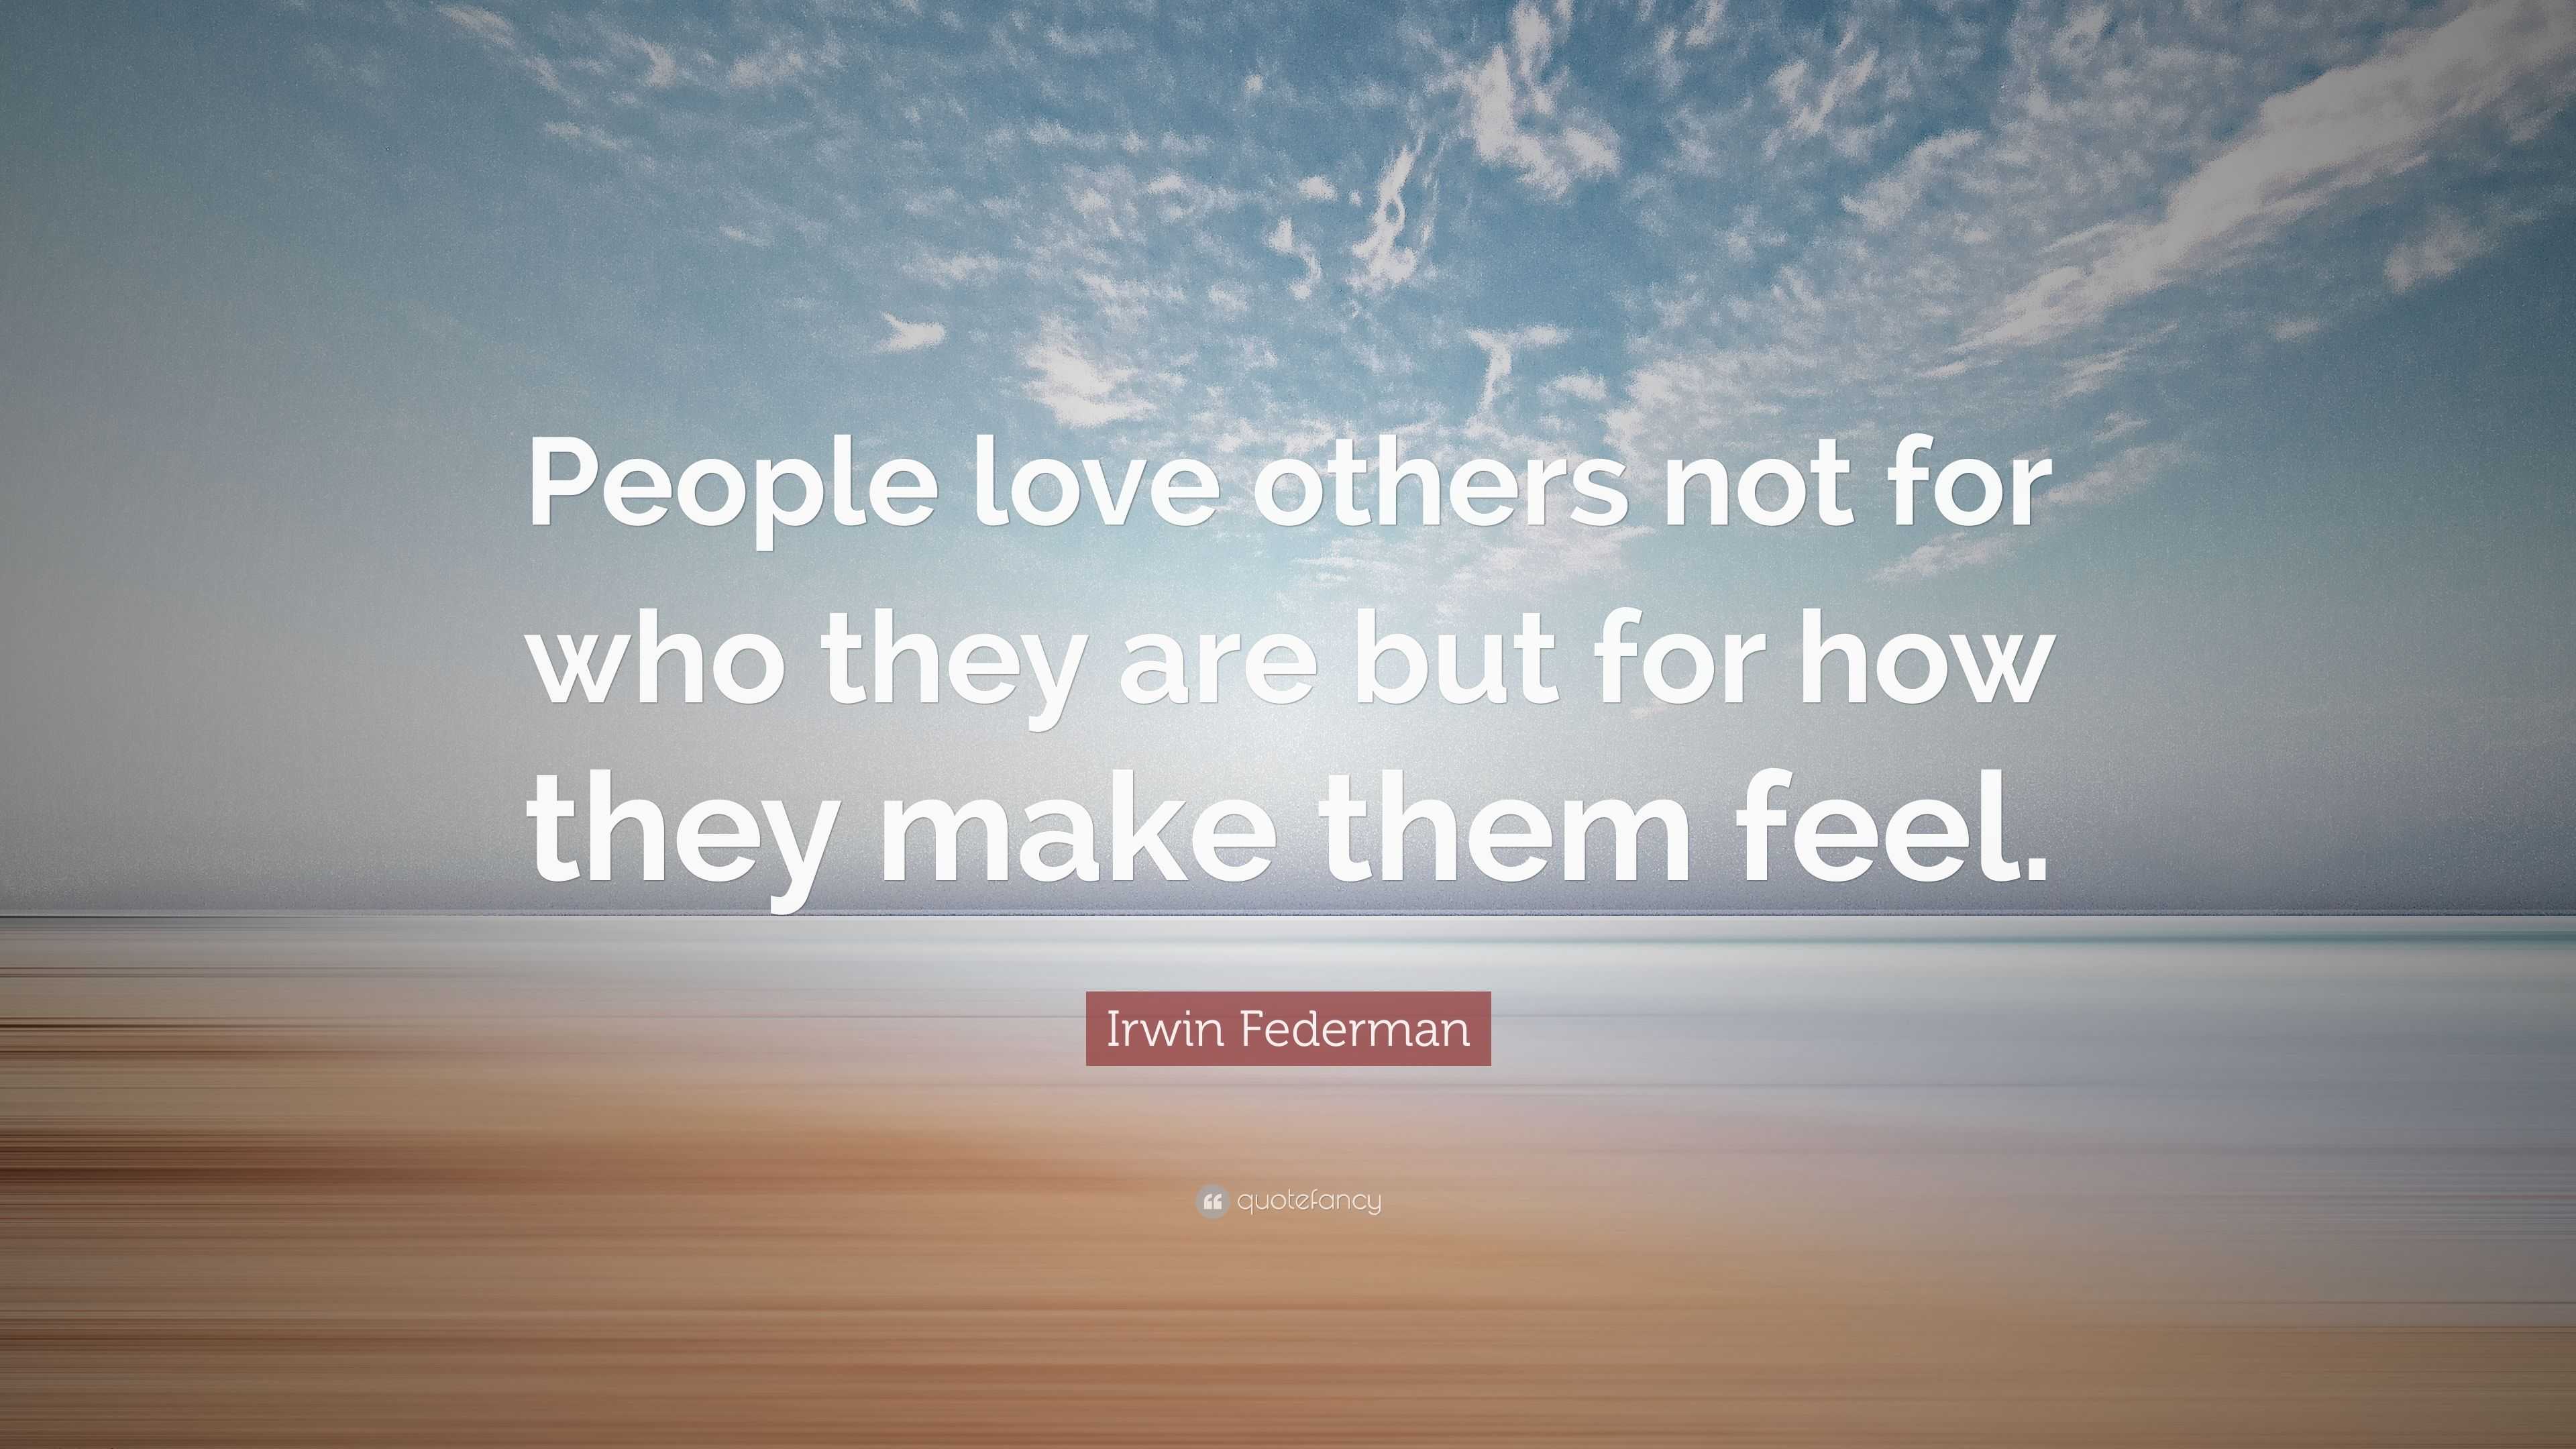 Irwin Federman Quote: “People love others not for who they are but for ...